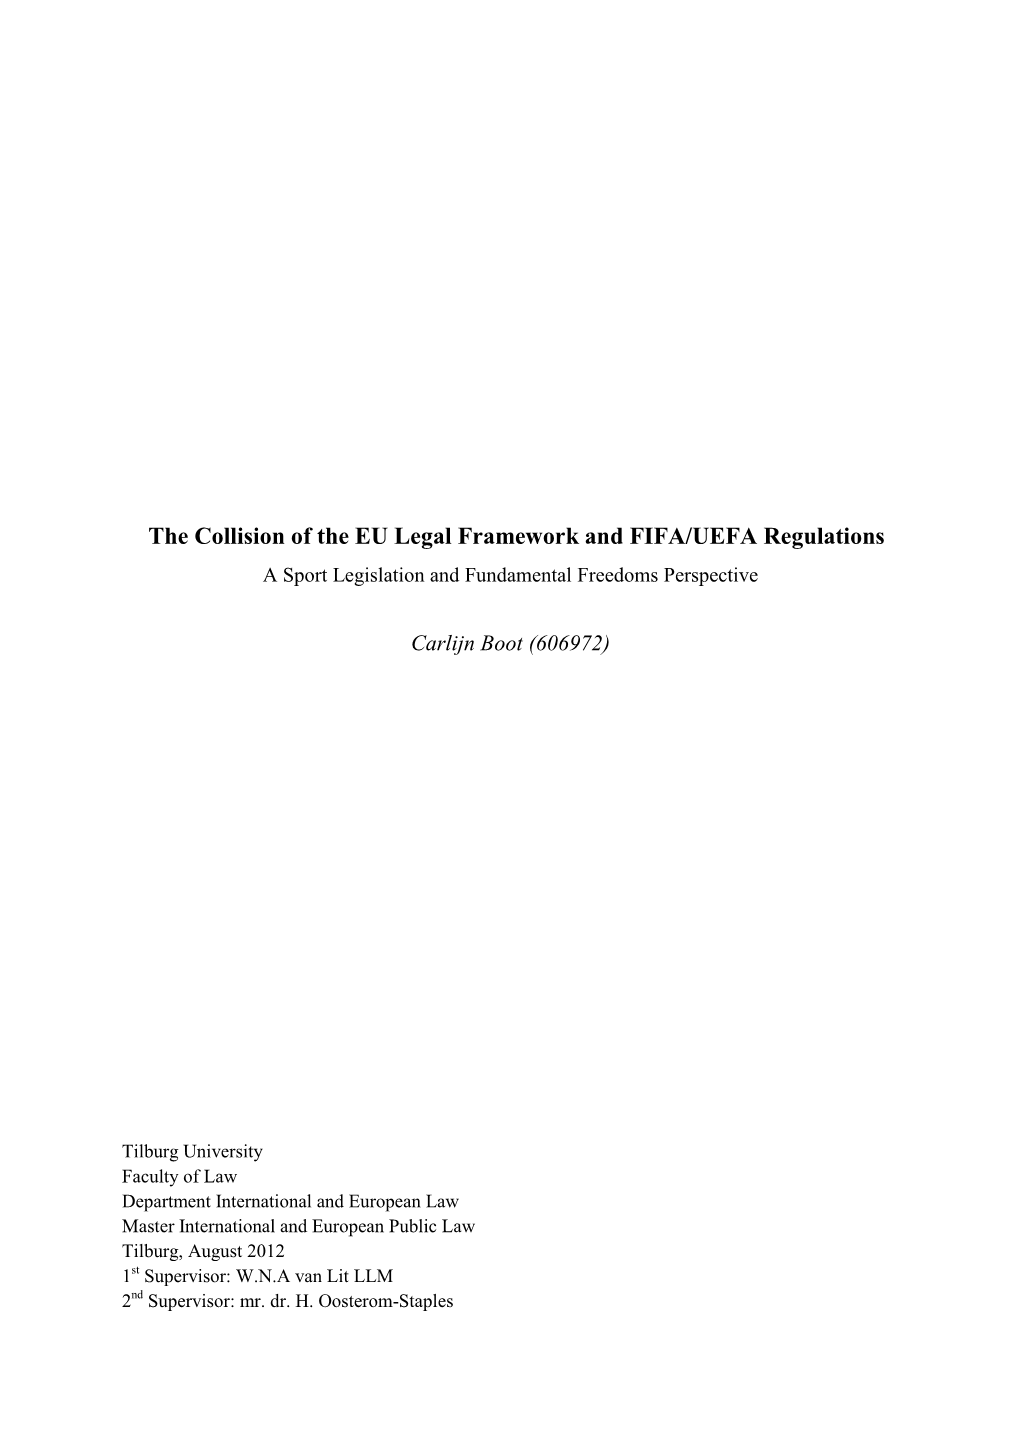 The Collision of the EU Legal Framework and FIFA/UEFA Regulations a Sport Legislation and Fundamental Freedoms Perspective